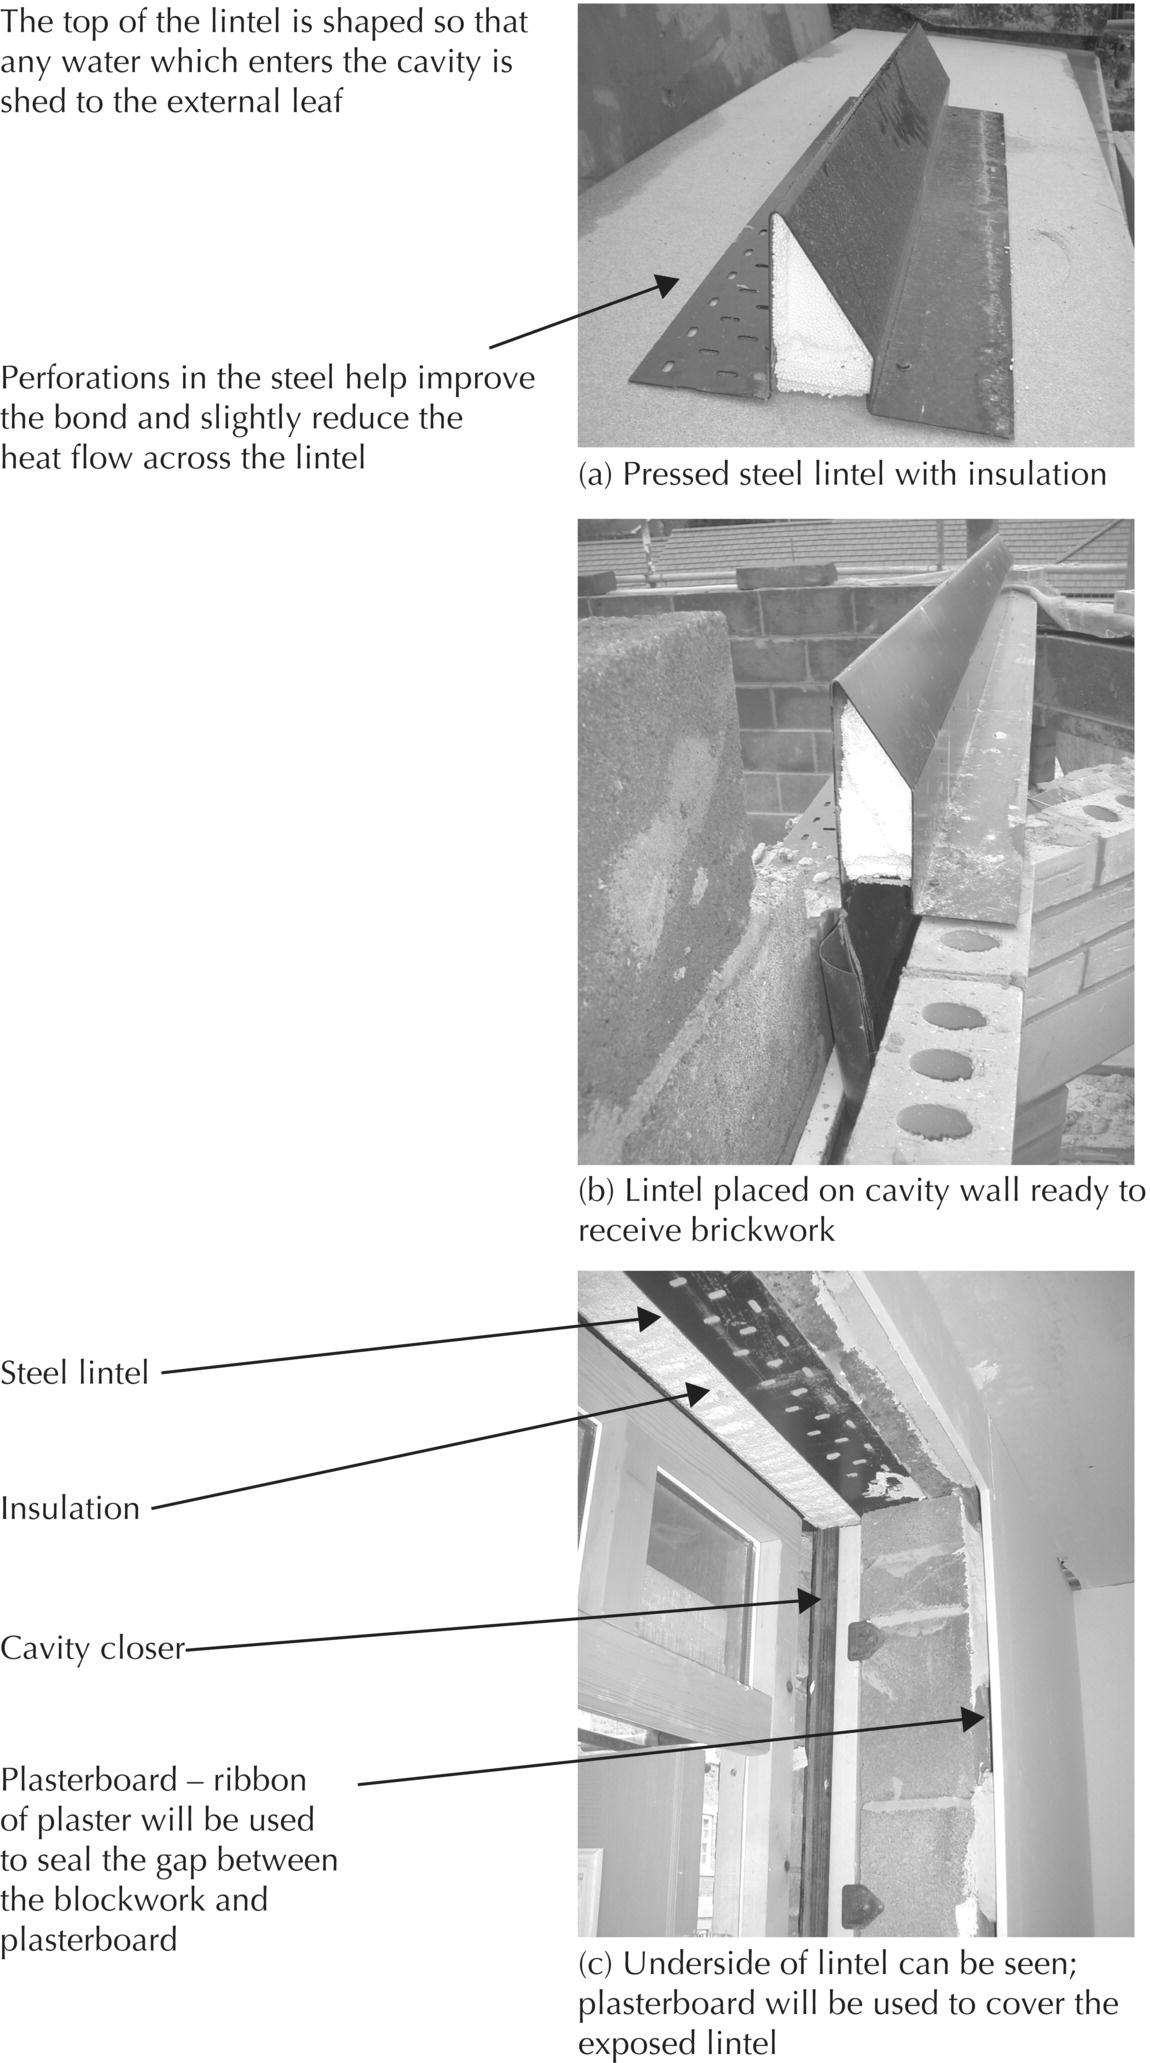 2 Photos displaying a pressed steel lintel with insulation (a), lintel placed on cavity wall ready to receive brickwork (b), and underside of lintel with arrows indicating steel lintel, insulation, etc. (c). 